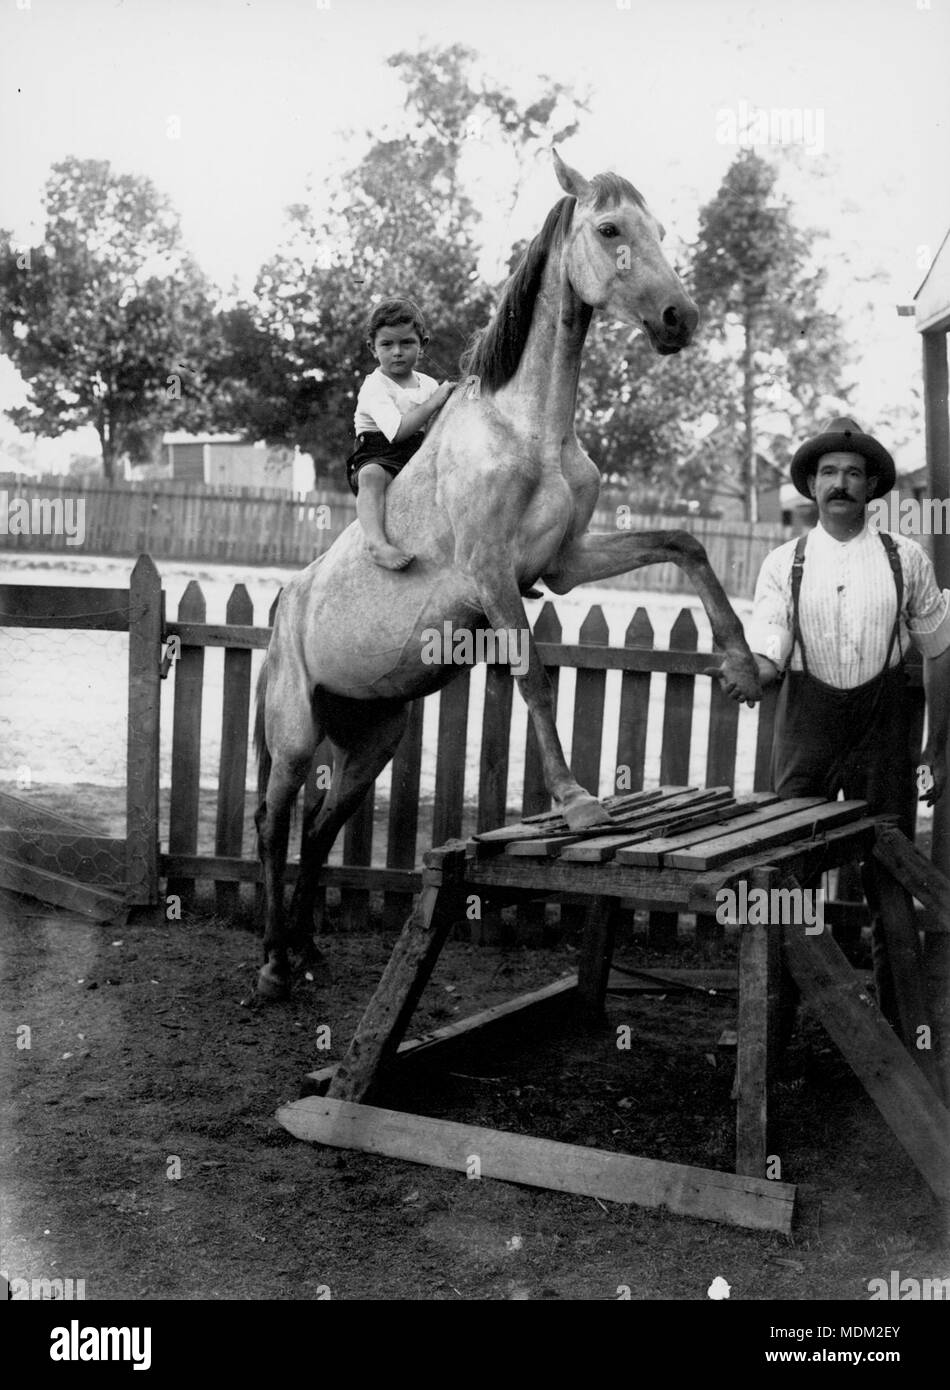 Horse doing tricks with a young boy on its back Stock Photo